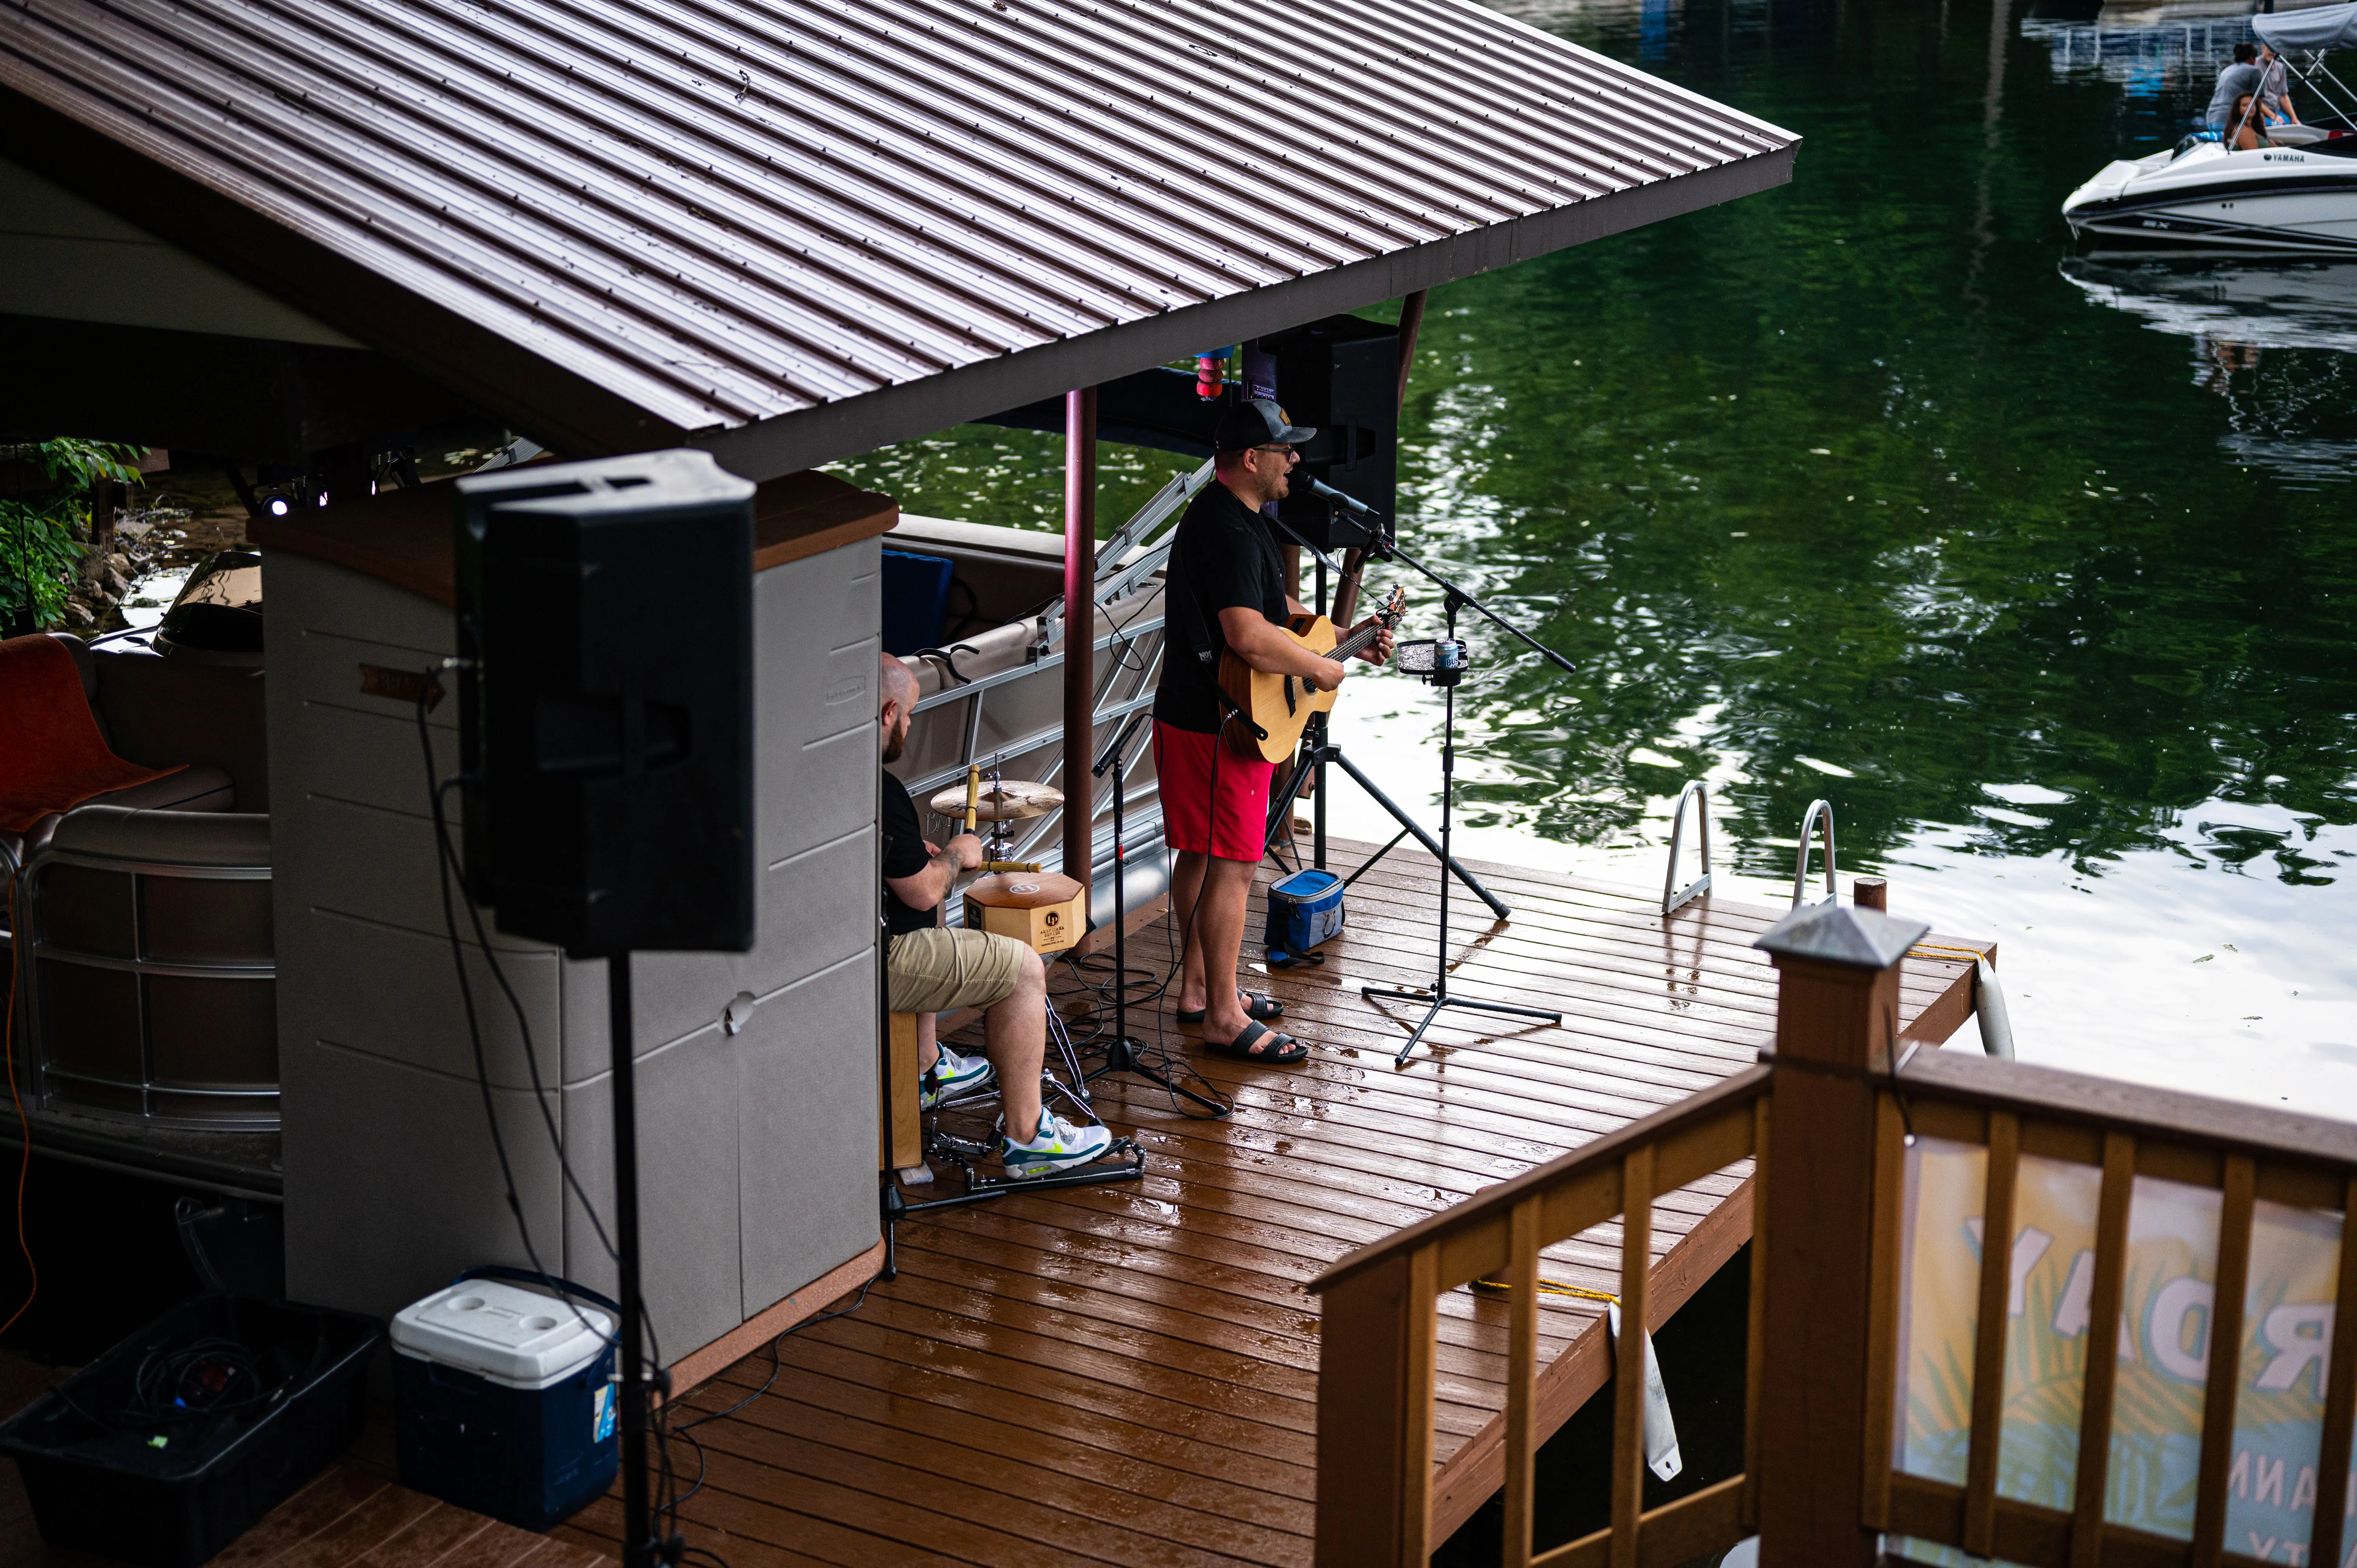 Man playing guitar on a covered dock by the water with a dog sitting nearby.